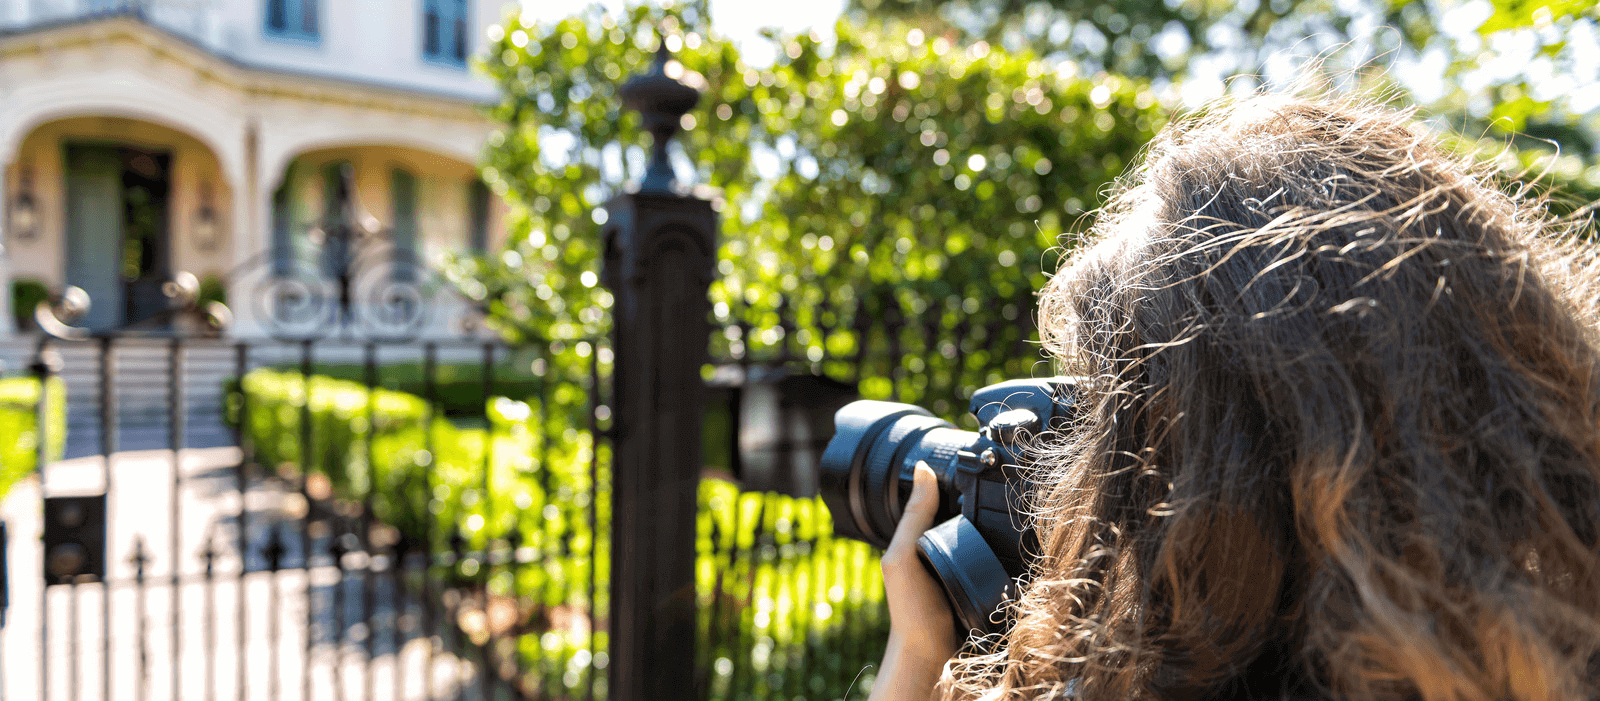 A professional photographer taking photos of the outside of a house.